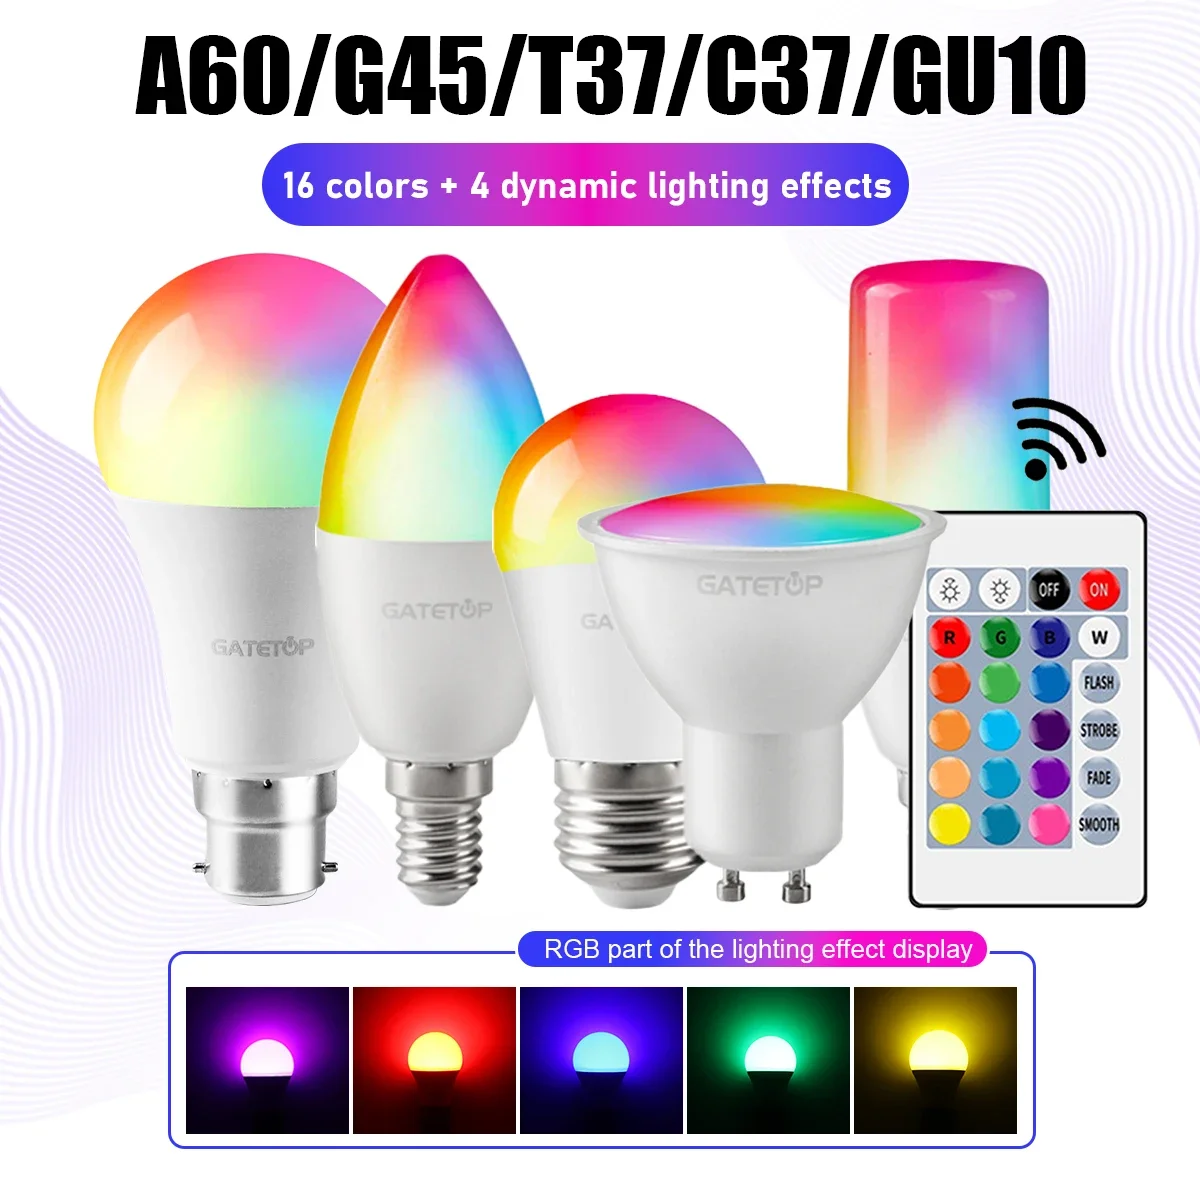 

1-10PCS Smart RGBW LED Bulb Spotlight E27 E14 B22 GU10 with Infrared Remote Control, Suitable for Colorful Home Lighting